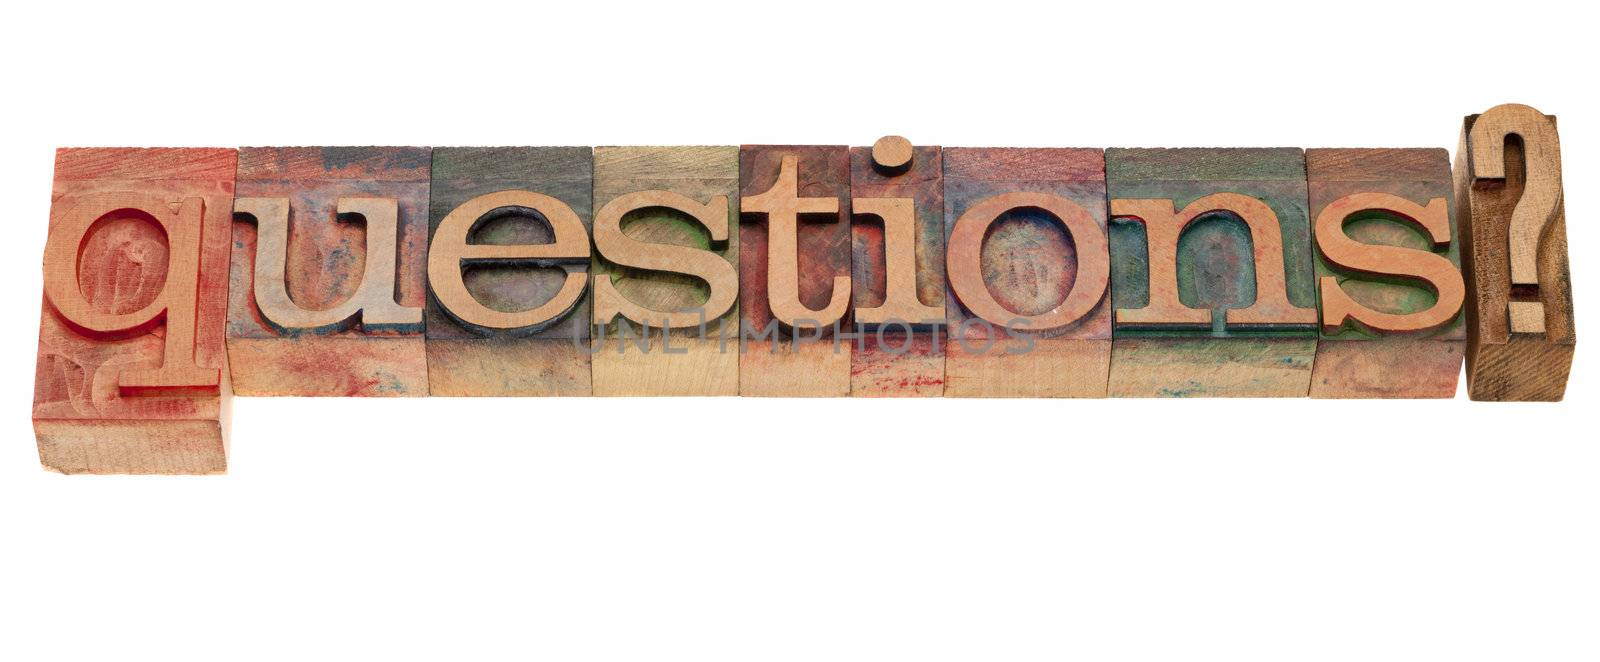 Questions? A word in vintage wooden letterpress printing blocks, stained by color inks, isolated on white